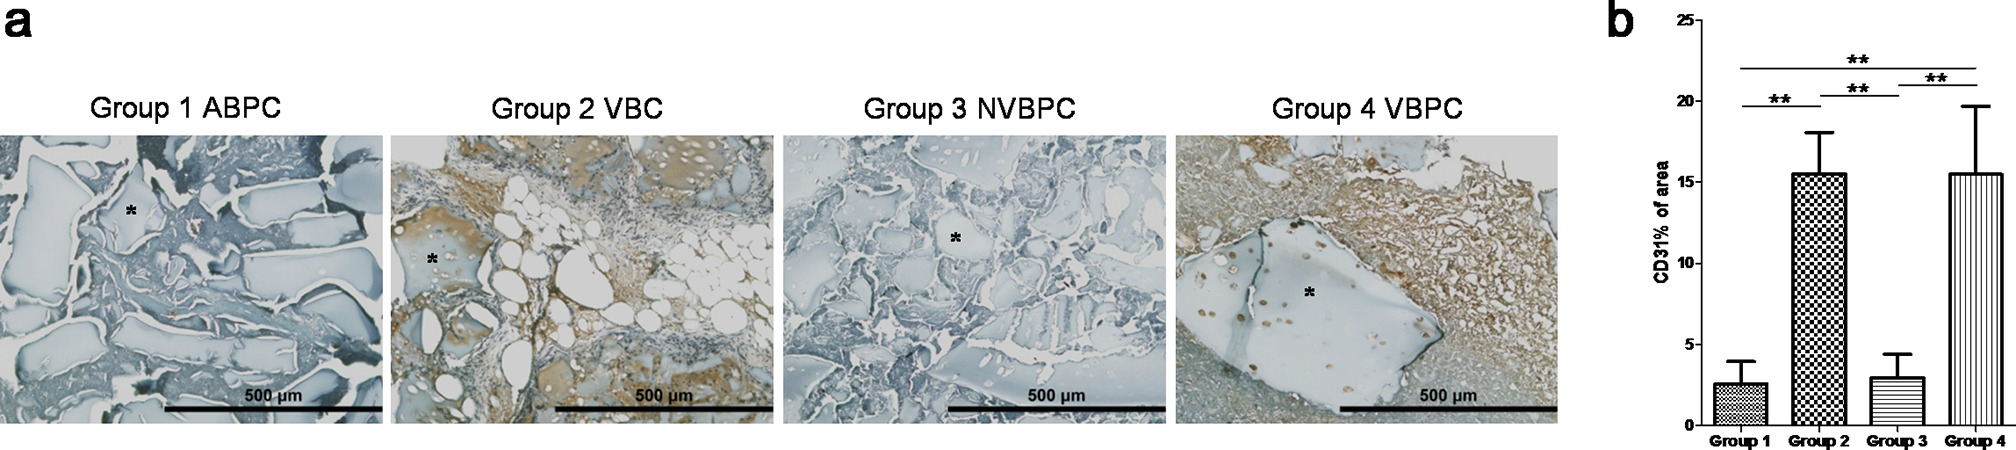 Fig. 7 
            Immunohistochemistry stain of CD31+ blood vessel formation after 12-week implantation in vivo. a) Better performance of CD31+ blood vessel formation (indicated by *) appeared for Group 2 and Group 4. b) Semiquantitative analysis confirmed the image results. **p < 0.001. ABPC; NVBPC, non-vascularized bone-periosteum construct; VBC, vascularized bone construct; VBPC, vascularized bone-periosteum construct.
          